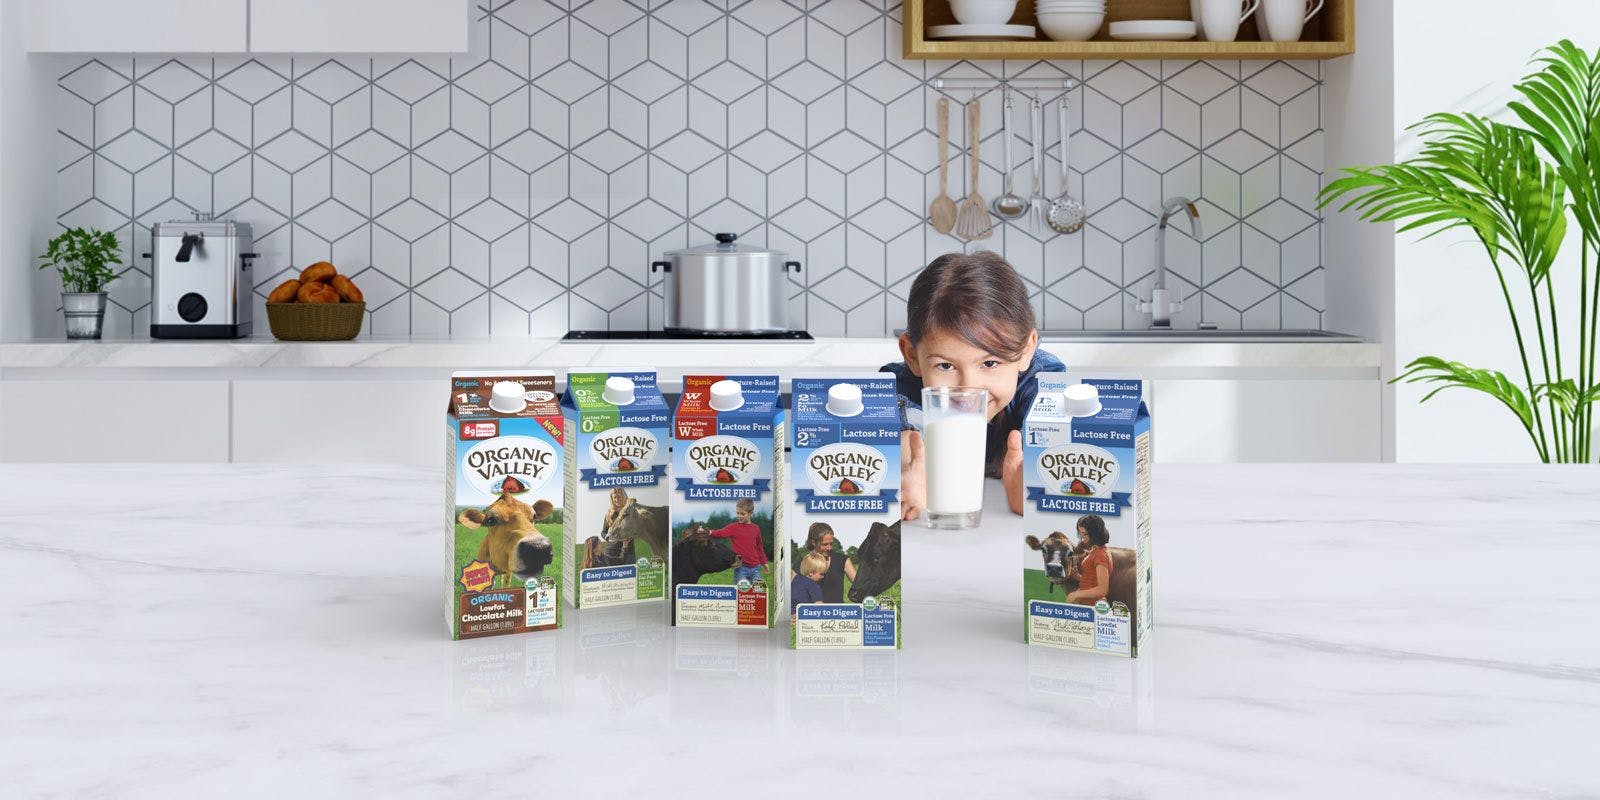 Young girl holds a glass of Organic Valley lactose-free milk and shows all the options for lactose-free milk.